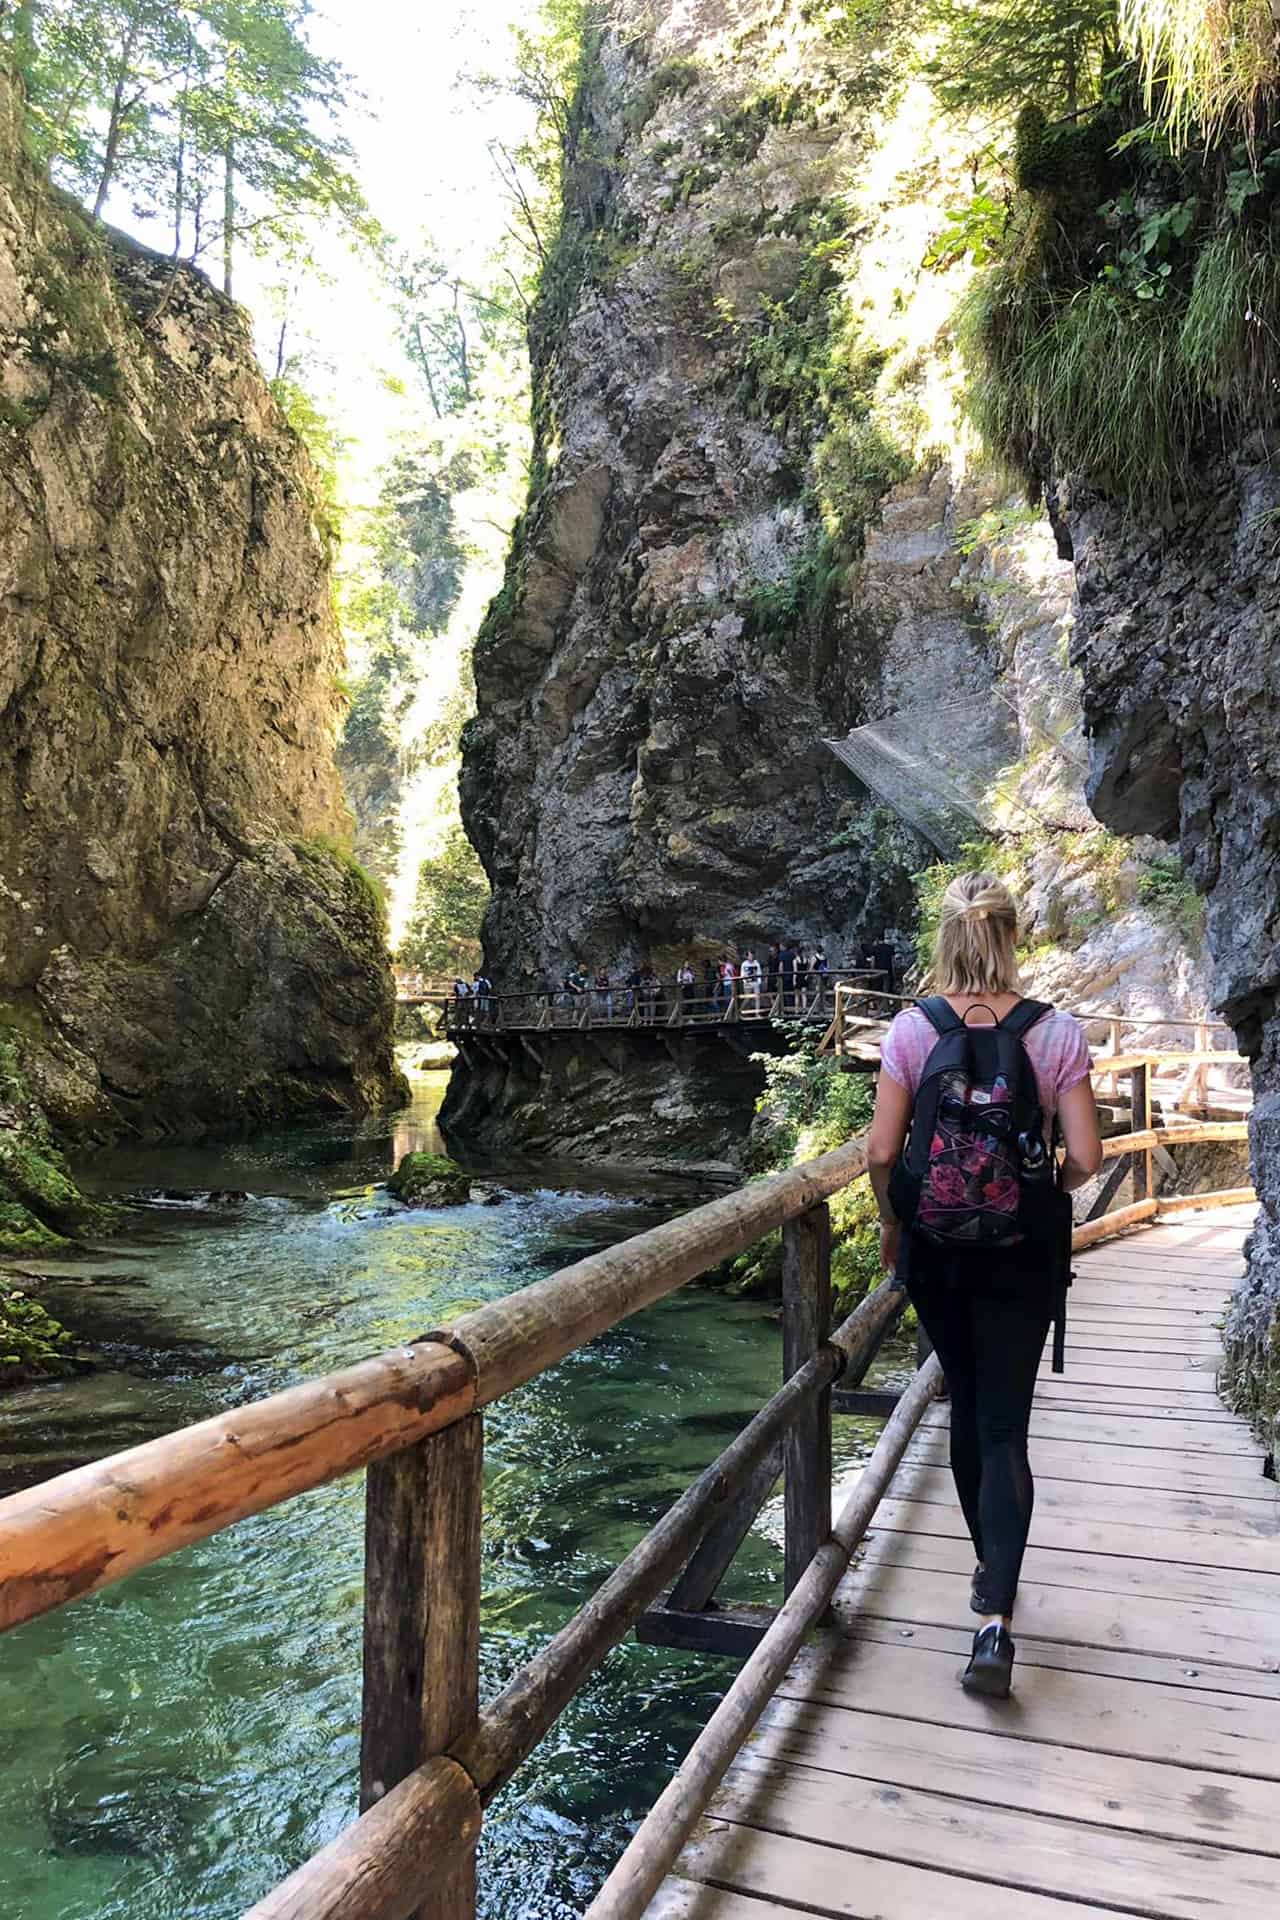 Vintgar Gorge most beautiful place to visit in Slovenia